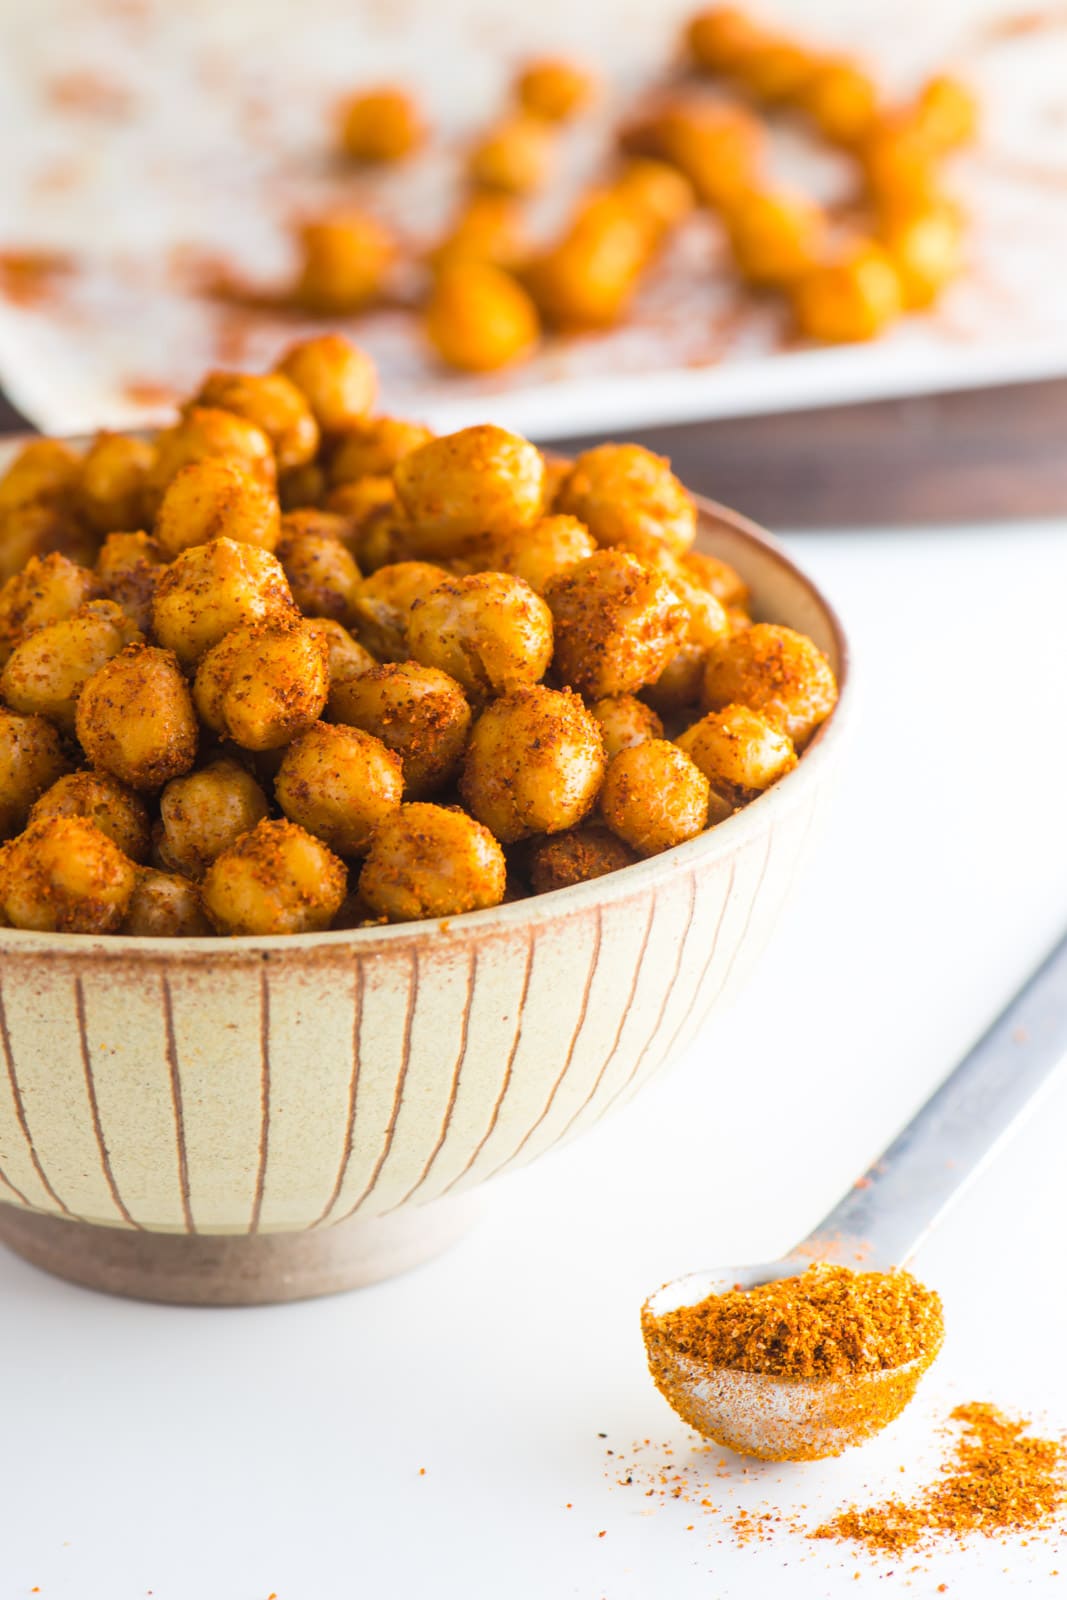 https://namelymarly.com/wp-content/uploads/2016/04/Spicy_Baked_Roasted_Chickpeas_01-web.jpg